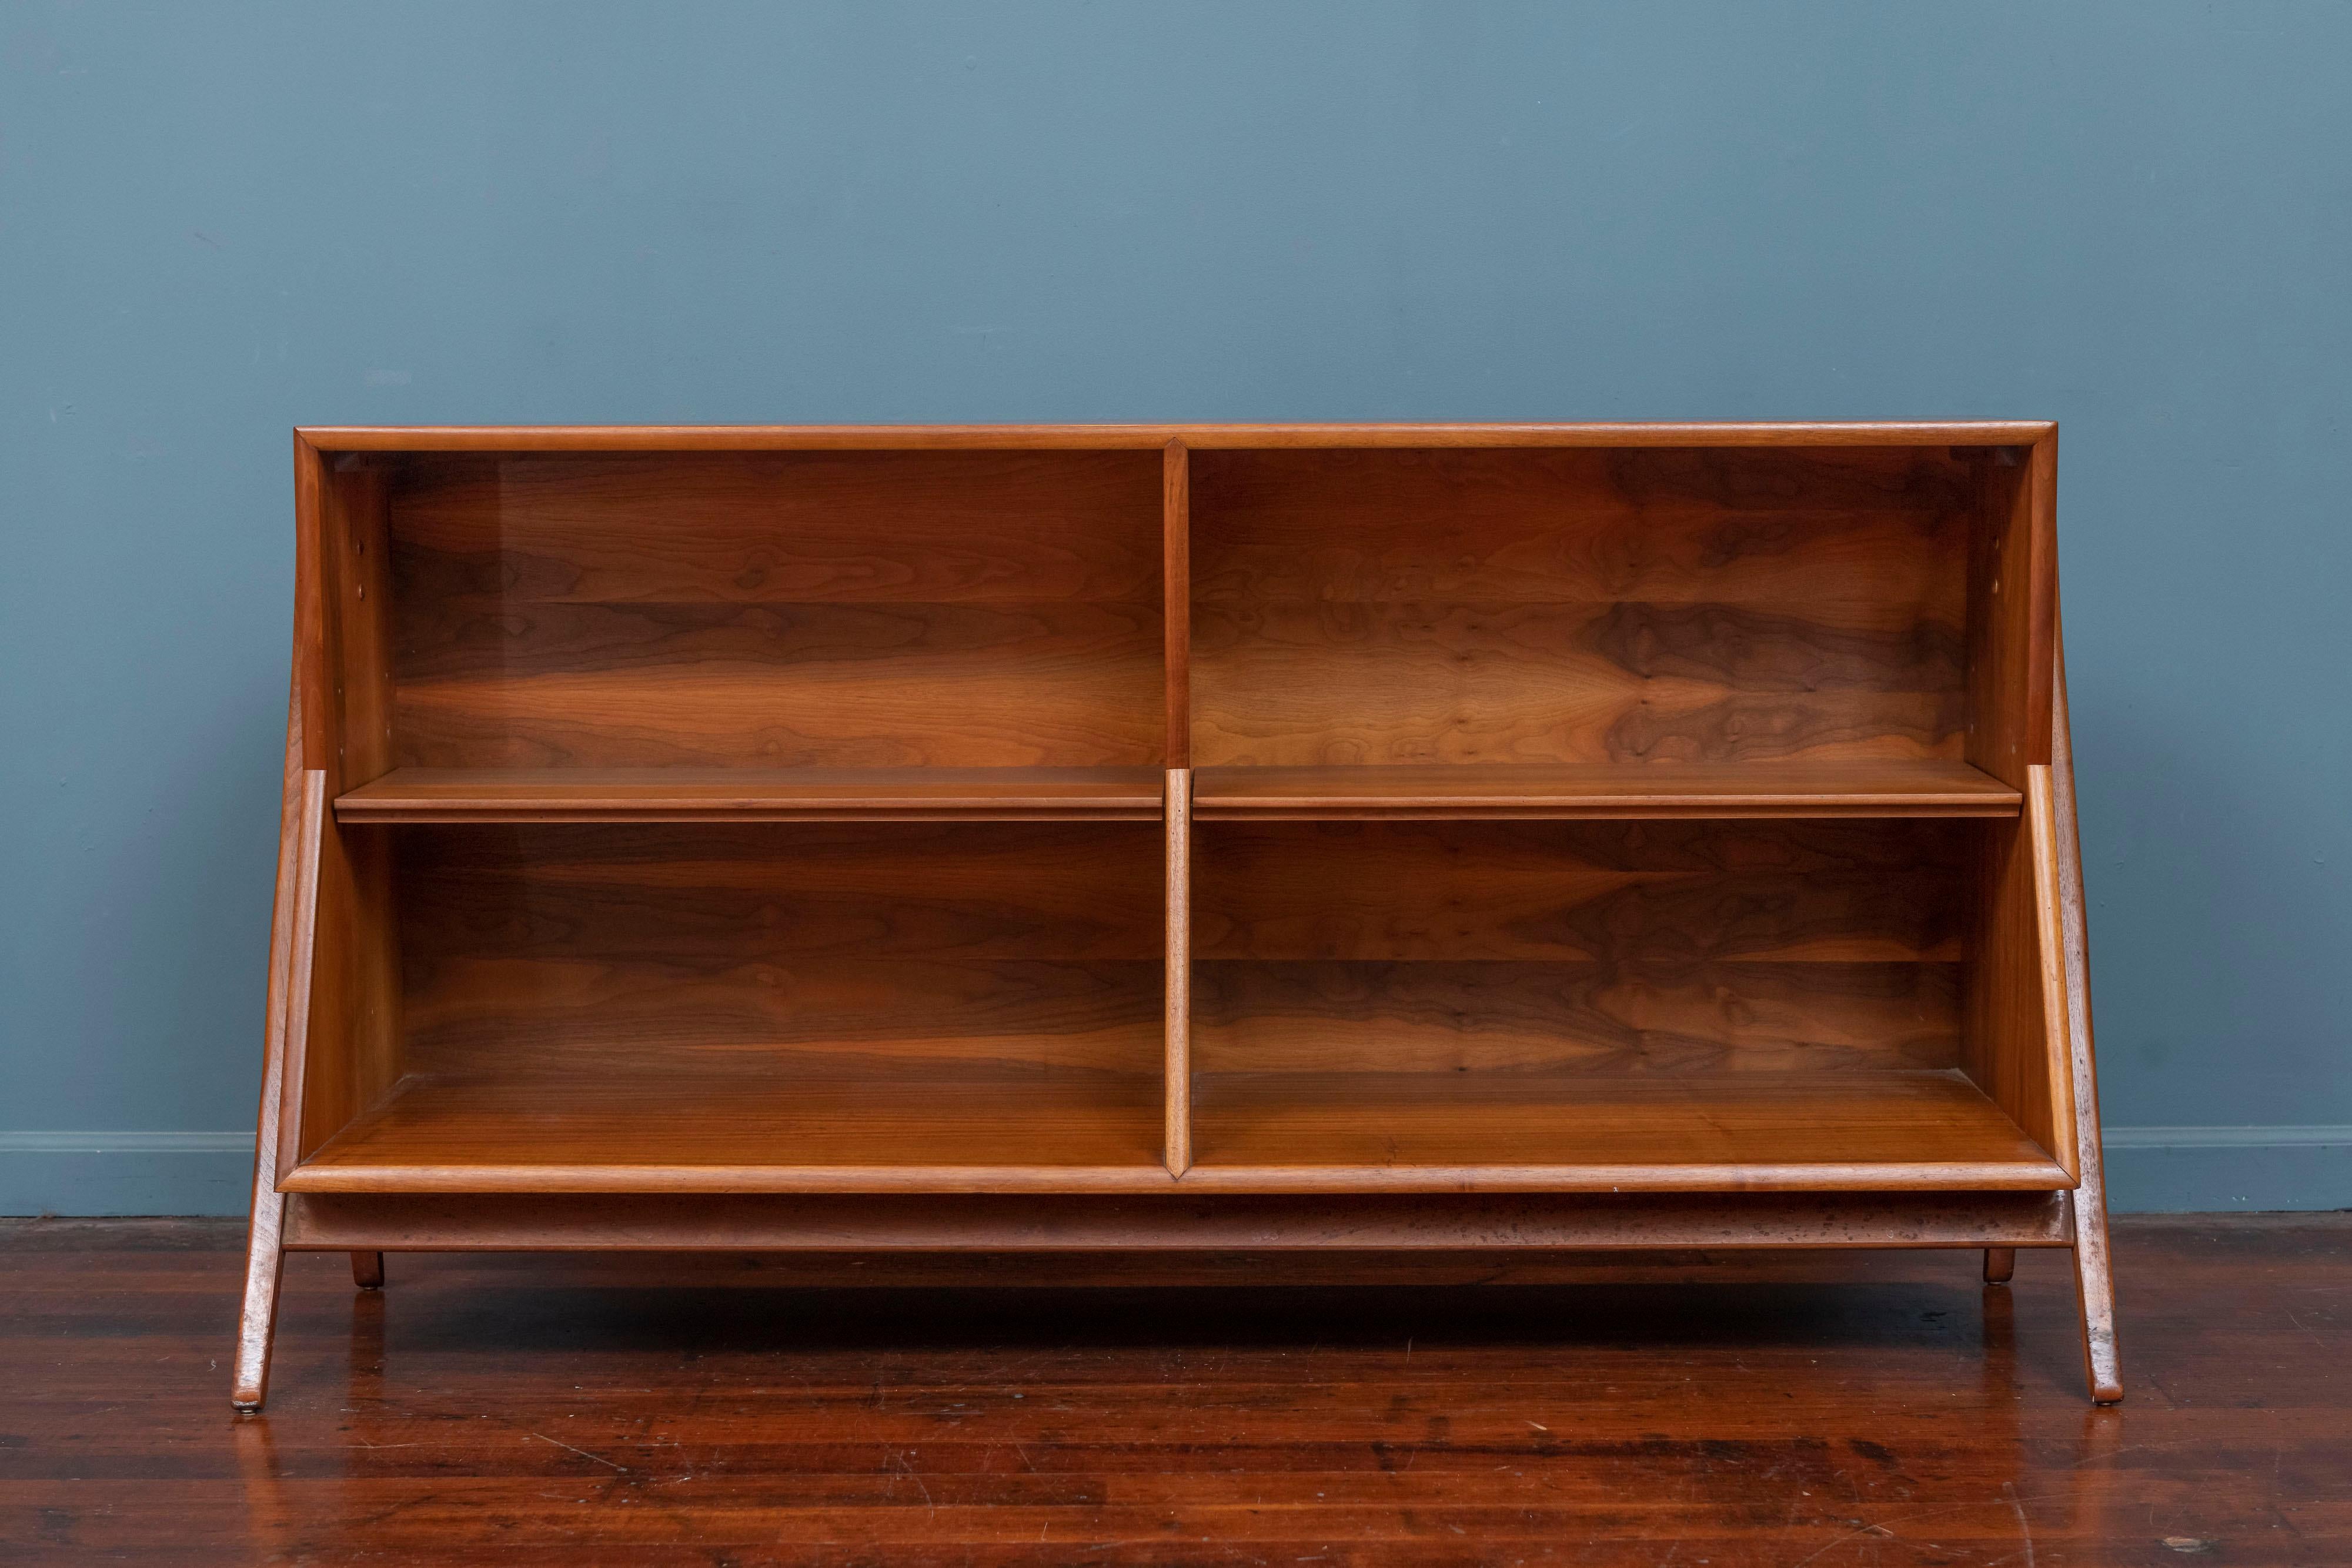 Kipp Stewart design bookshelf for his Declaration line produced by Drexel Furniture U.S.A. Made from gorgeous figurative walnut with two adjustable shelfs perfect for your vinyl collection or as a display shelf. High quality construction and